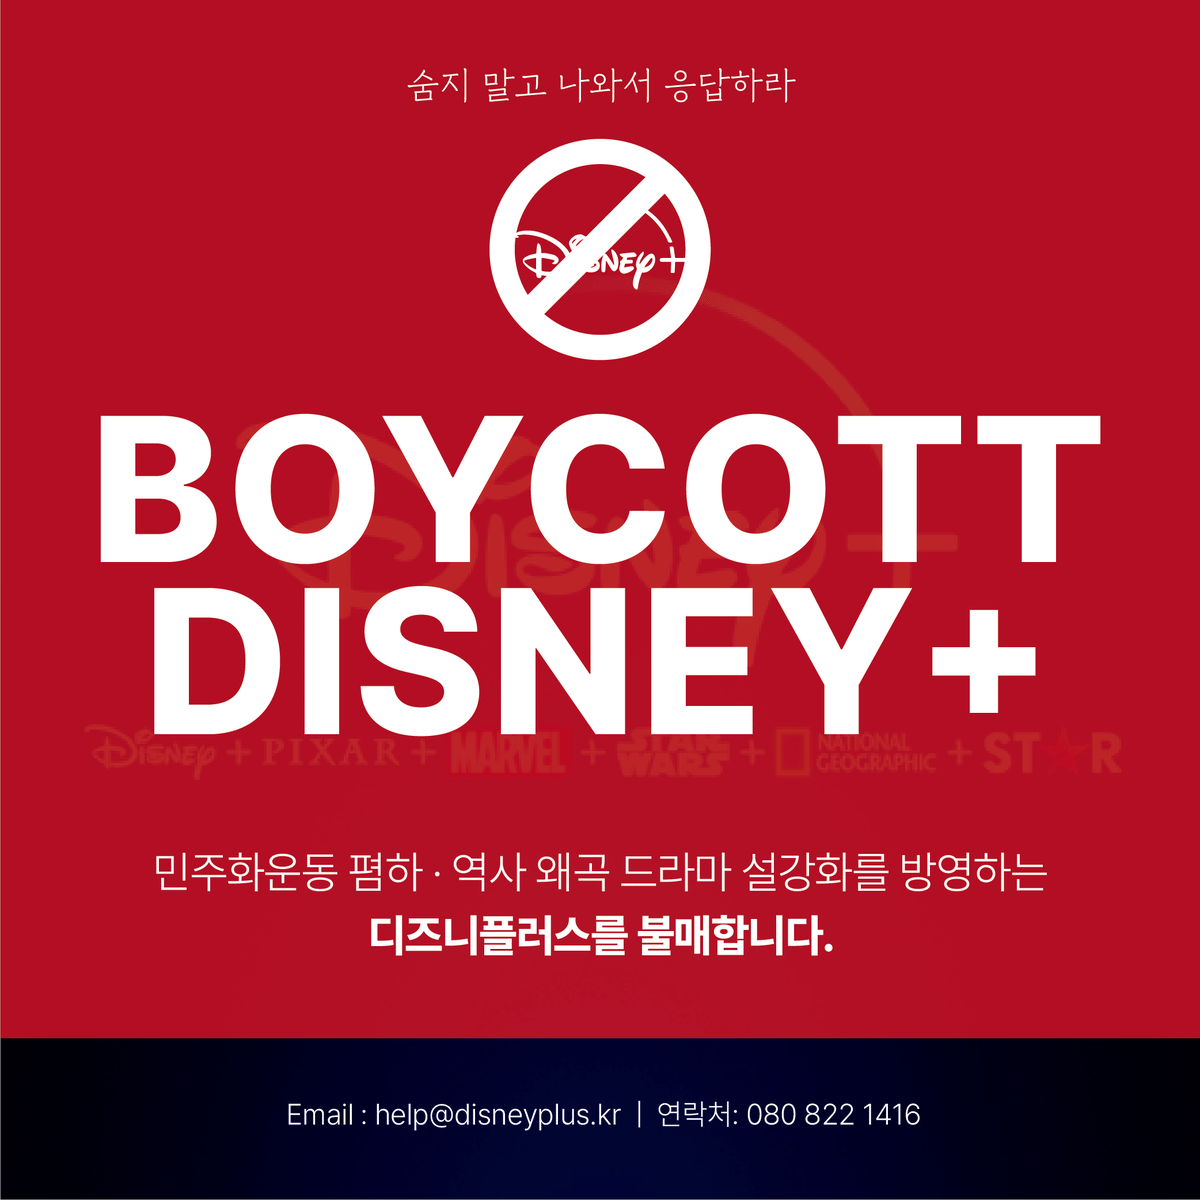 The Kujpg, which announced its boycott of Disney Plus.